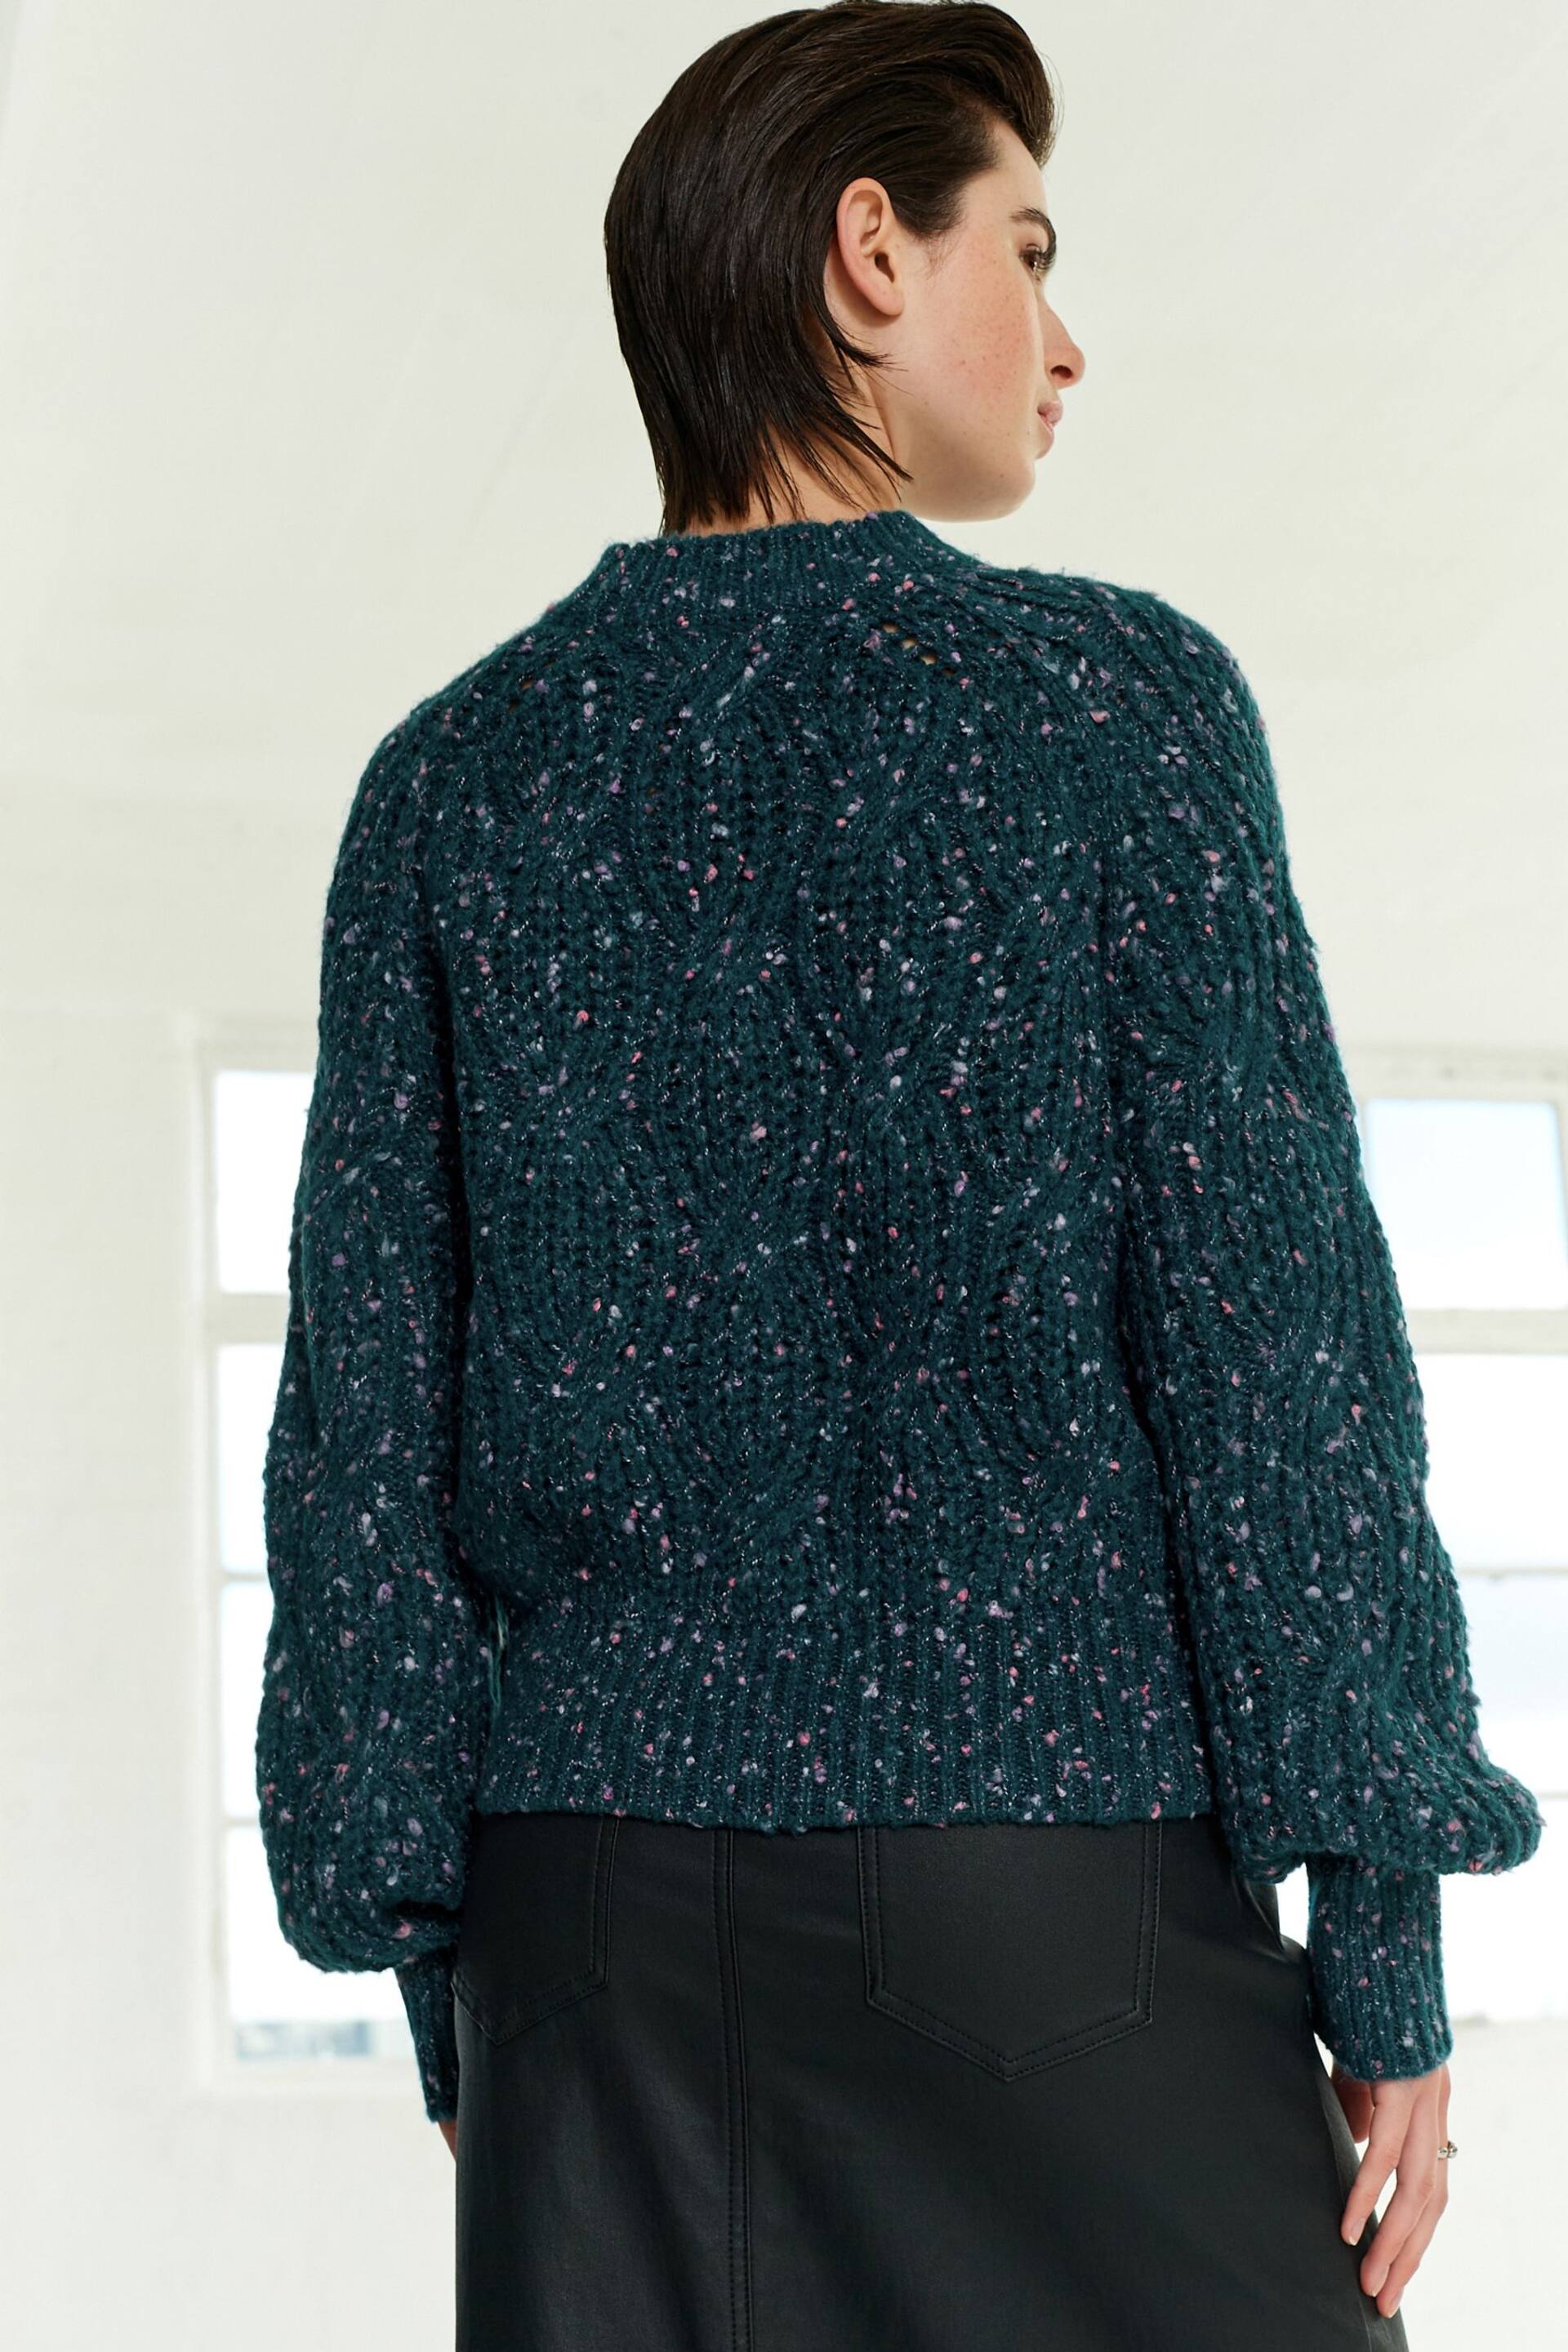 Teal Blue Pom Neppy Cable Stitch Jumper - Image 3 of 6